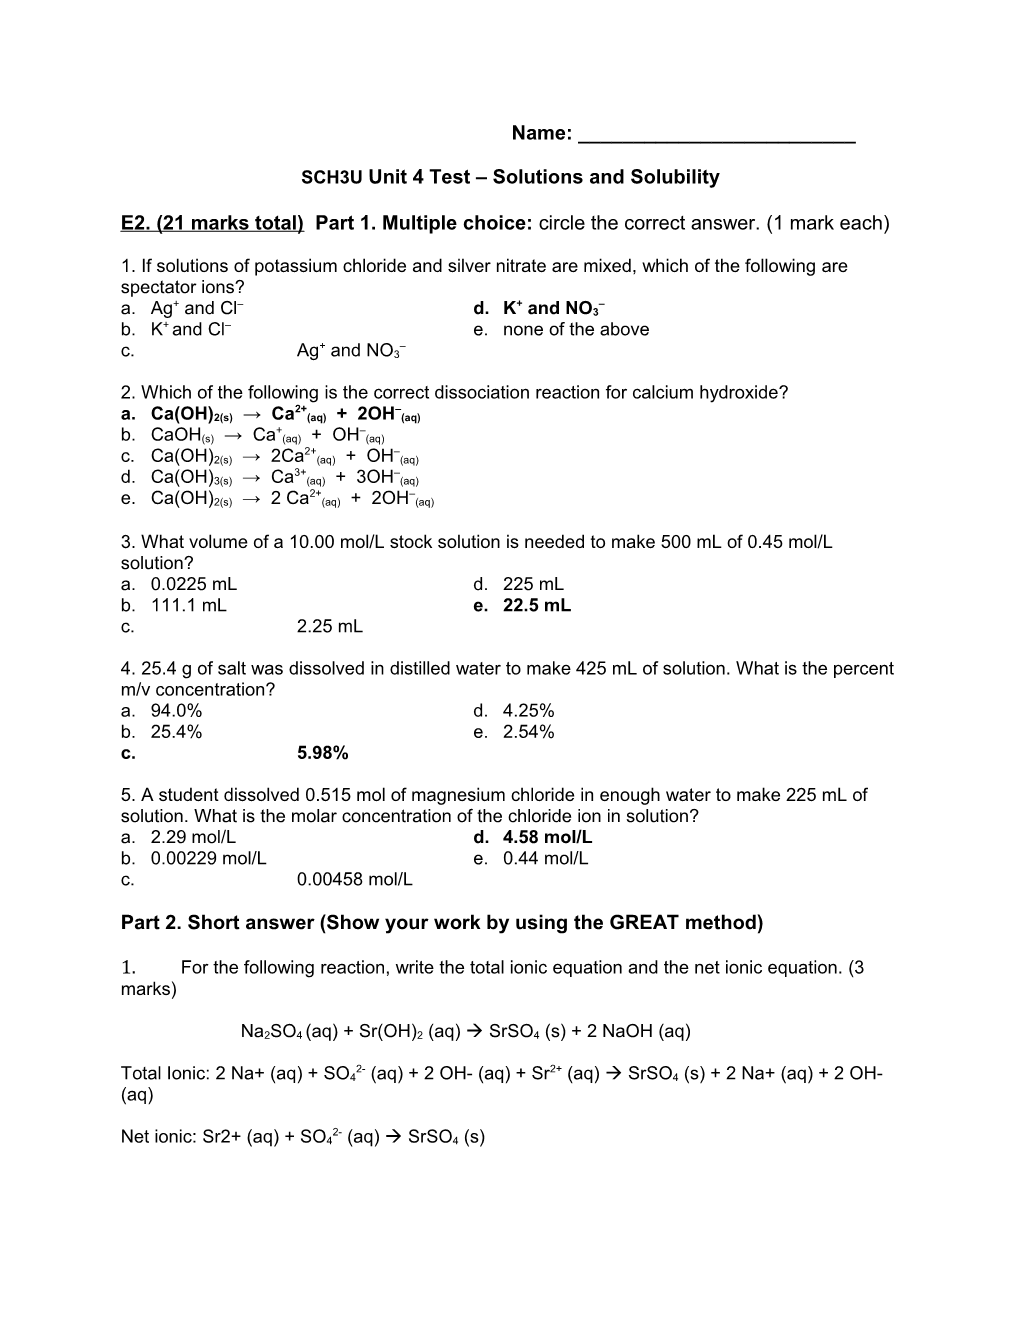 SCH3U Unit 4 Test Solutions and Solubility